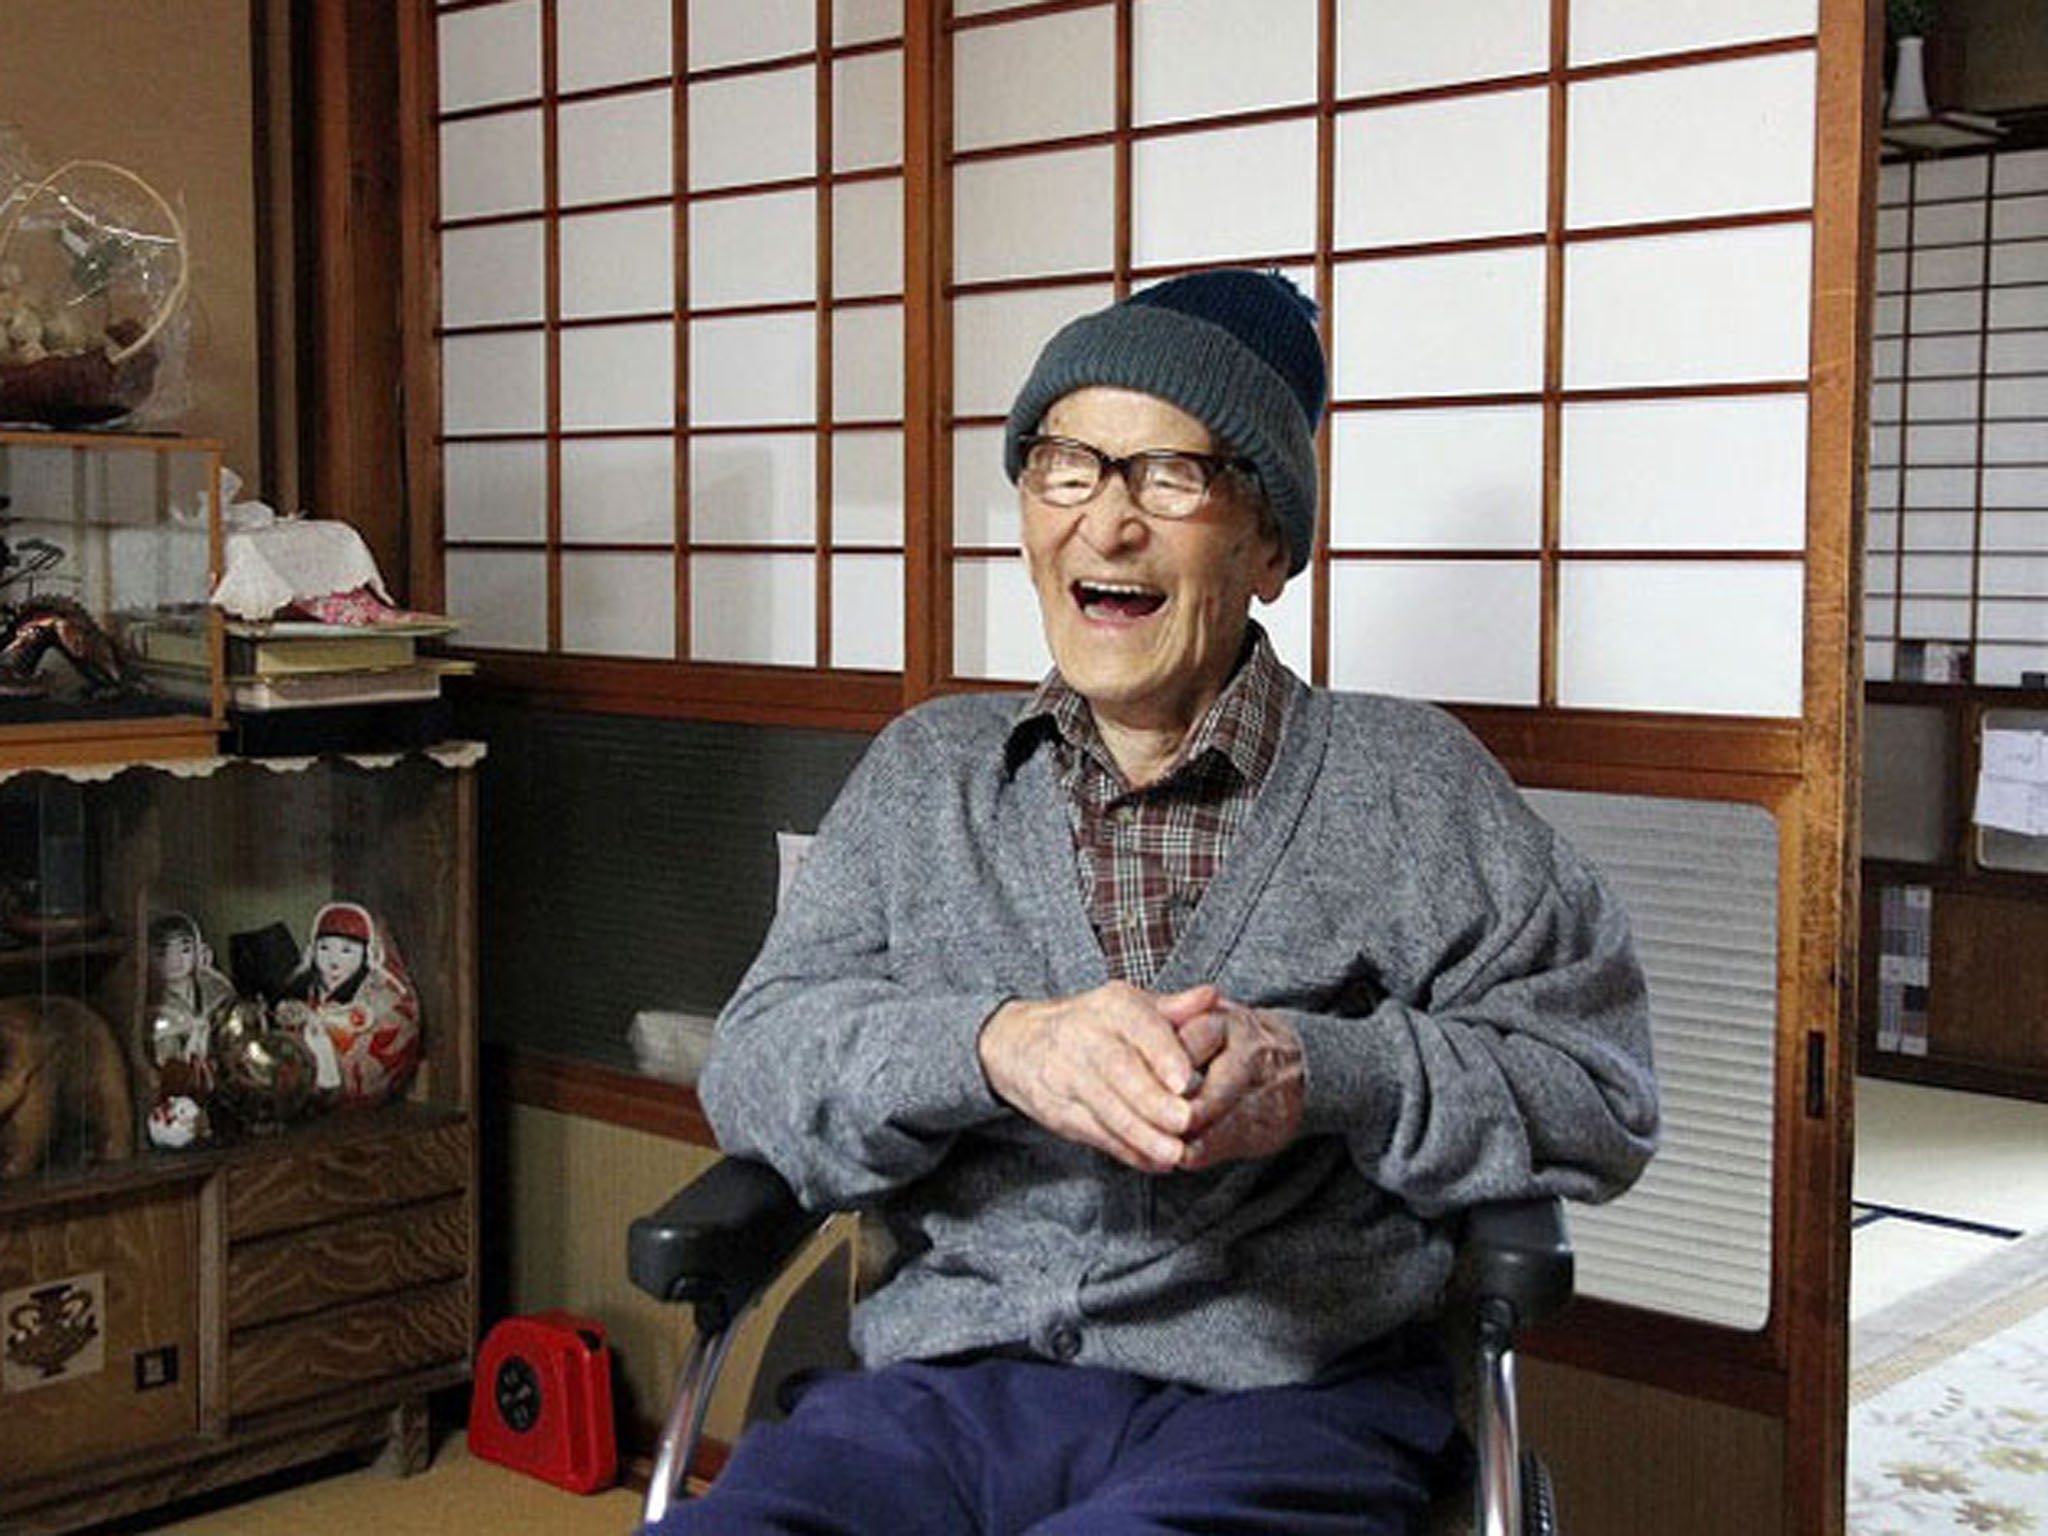 Japanese 115-year-old becomes oldest man in recorded history The Independent The Independent pic